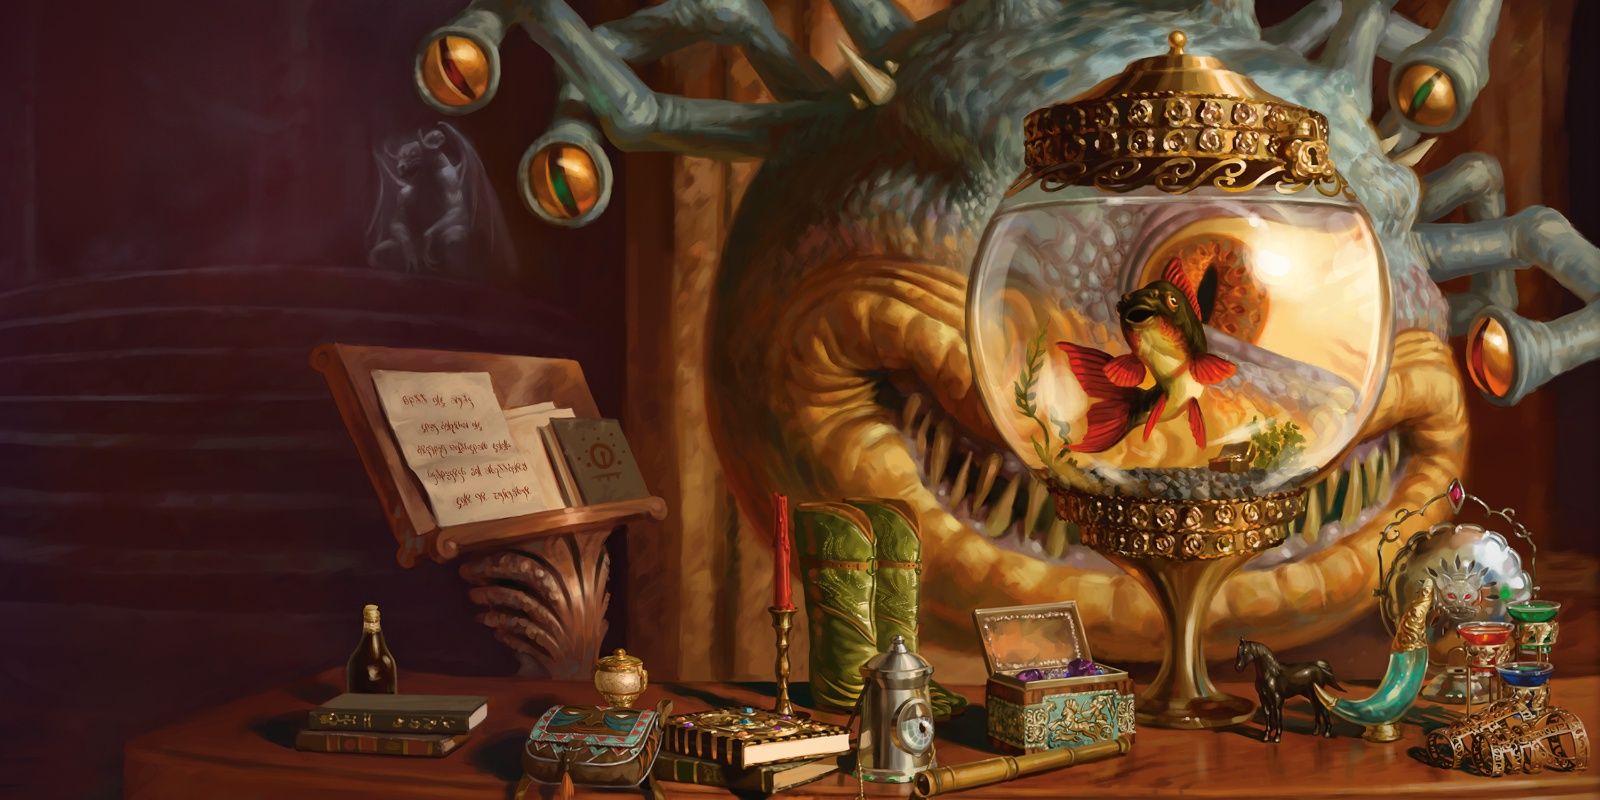 Xanathar the beholder, from the 5e book - Xanathar's Guide To Everything